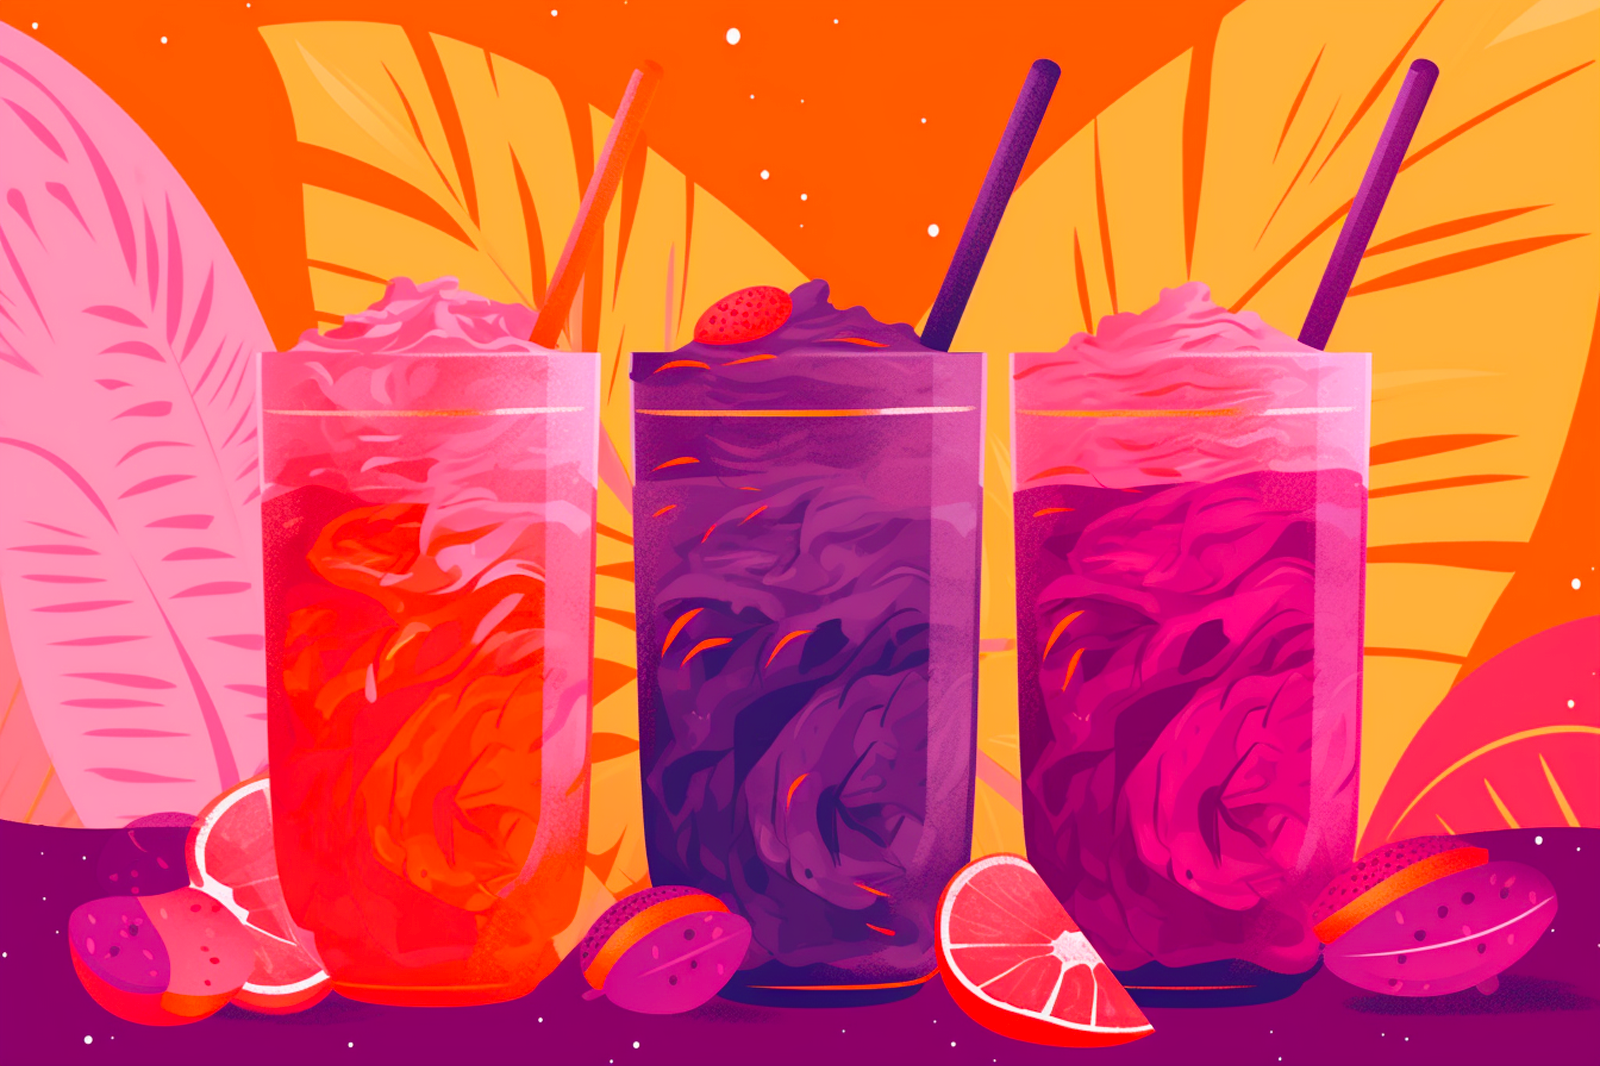 Illustration of 3 smoothies with fruit slices between them.